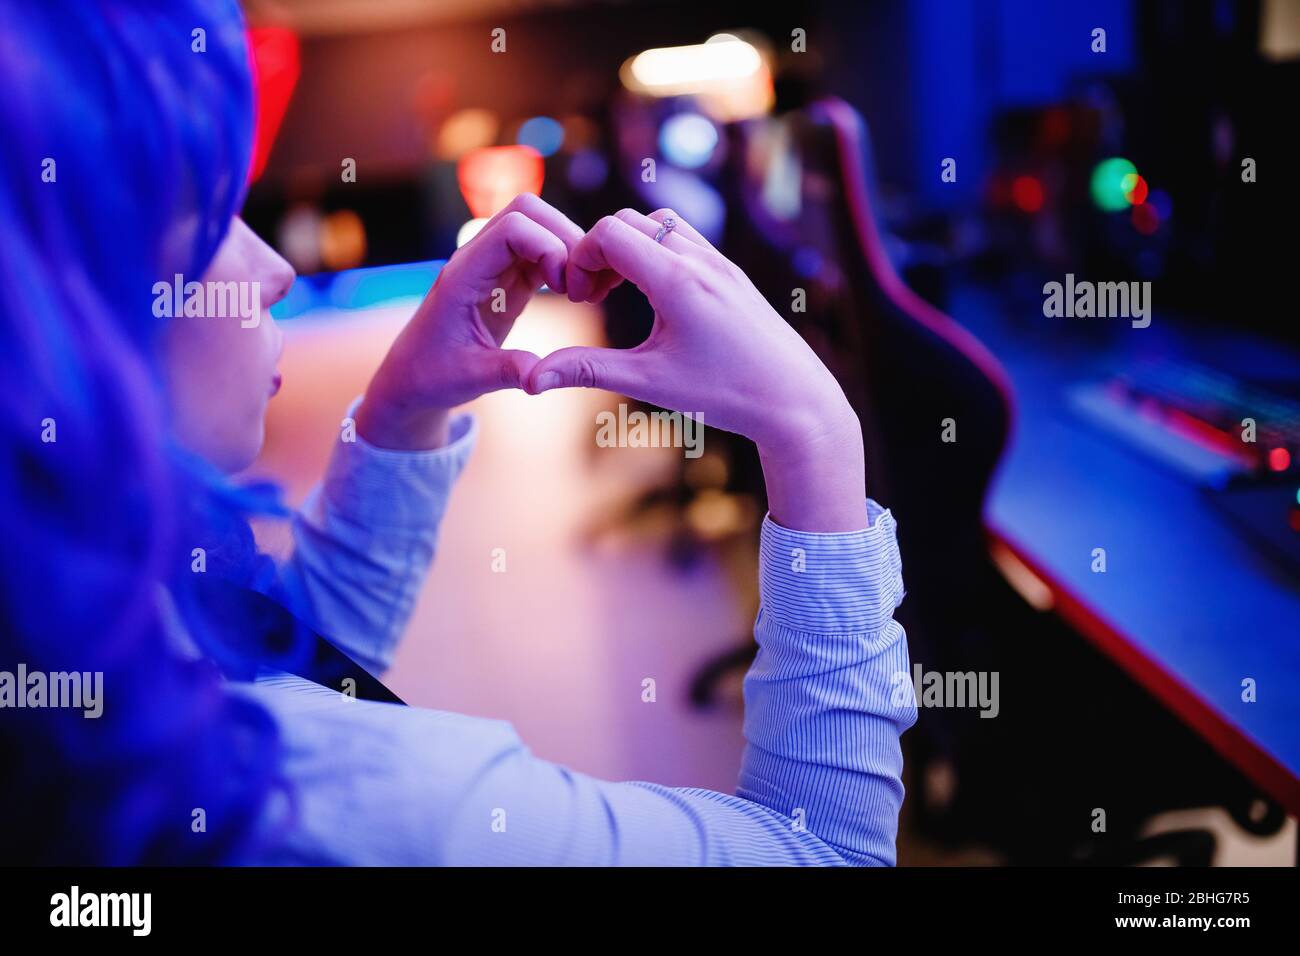 Streamer beautiful woman shows heart sign with hands professional gamer playing online video games computer, neon color Stock Photo